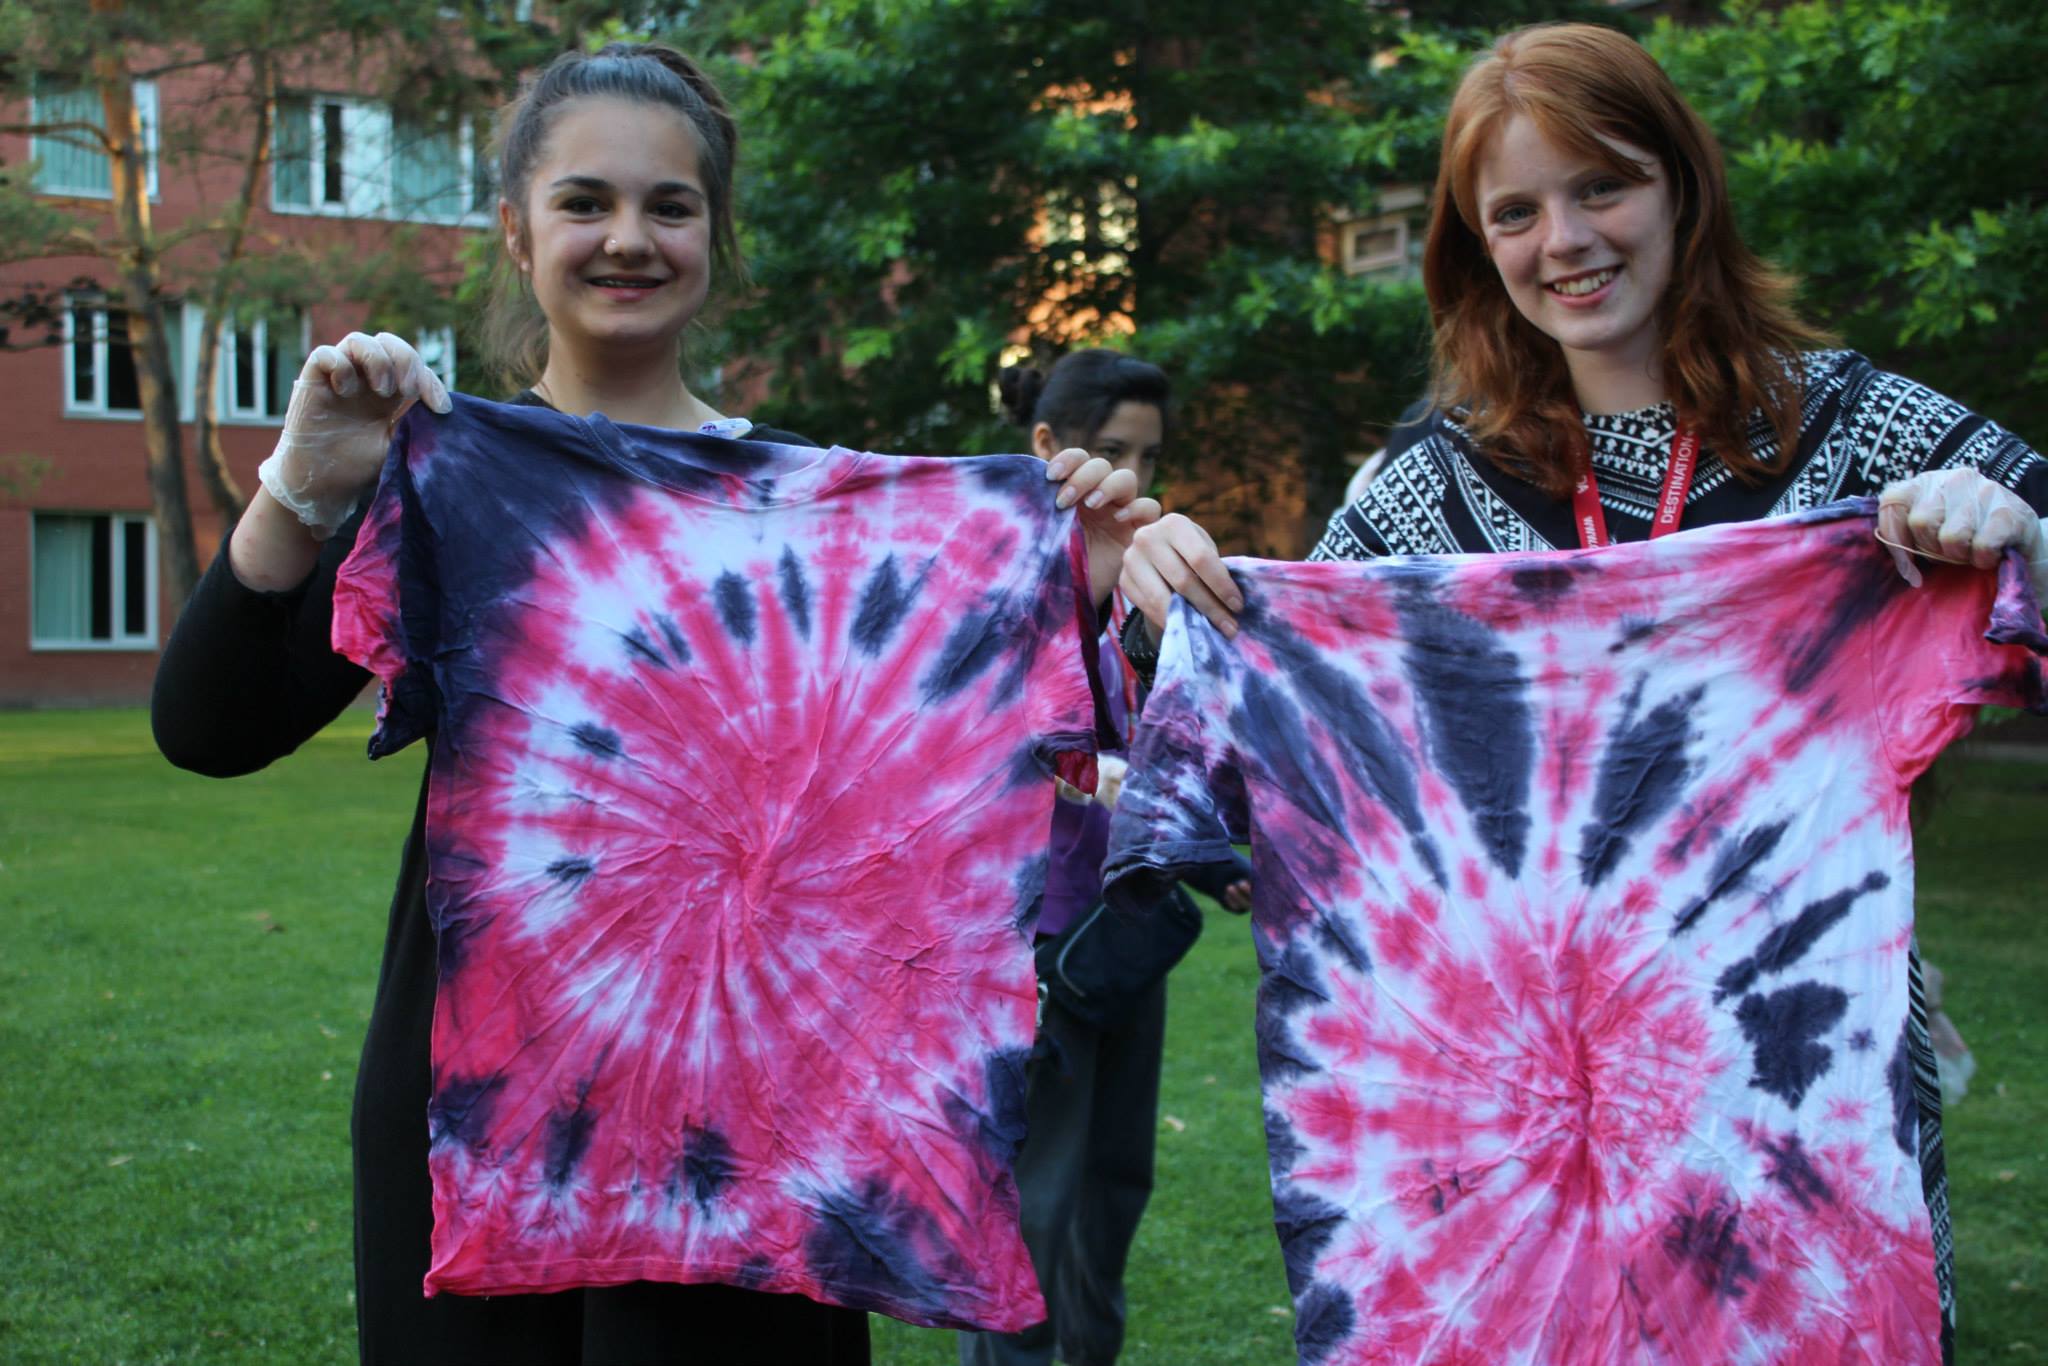 Kids tie dye their team colours as they take part in Destination Canada’s Olympic activities